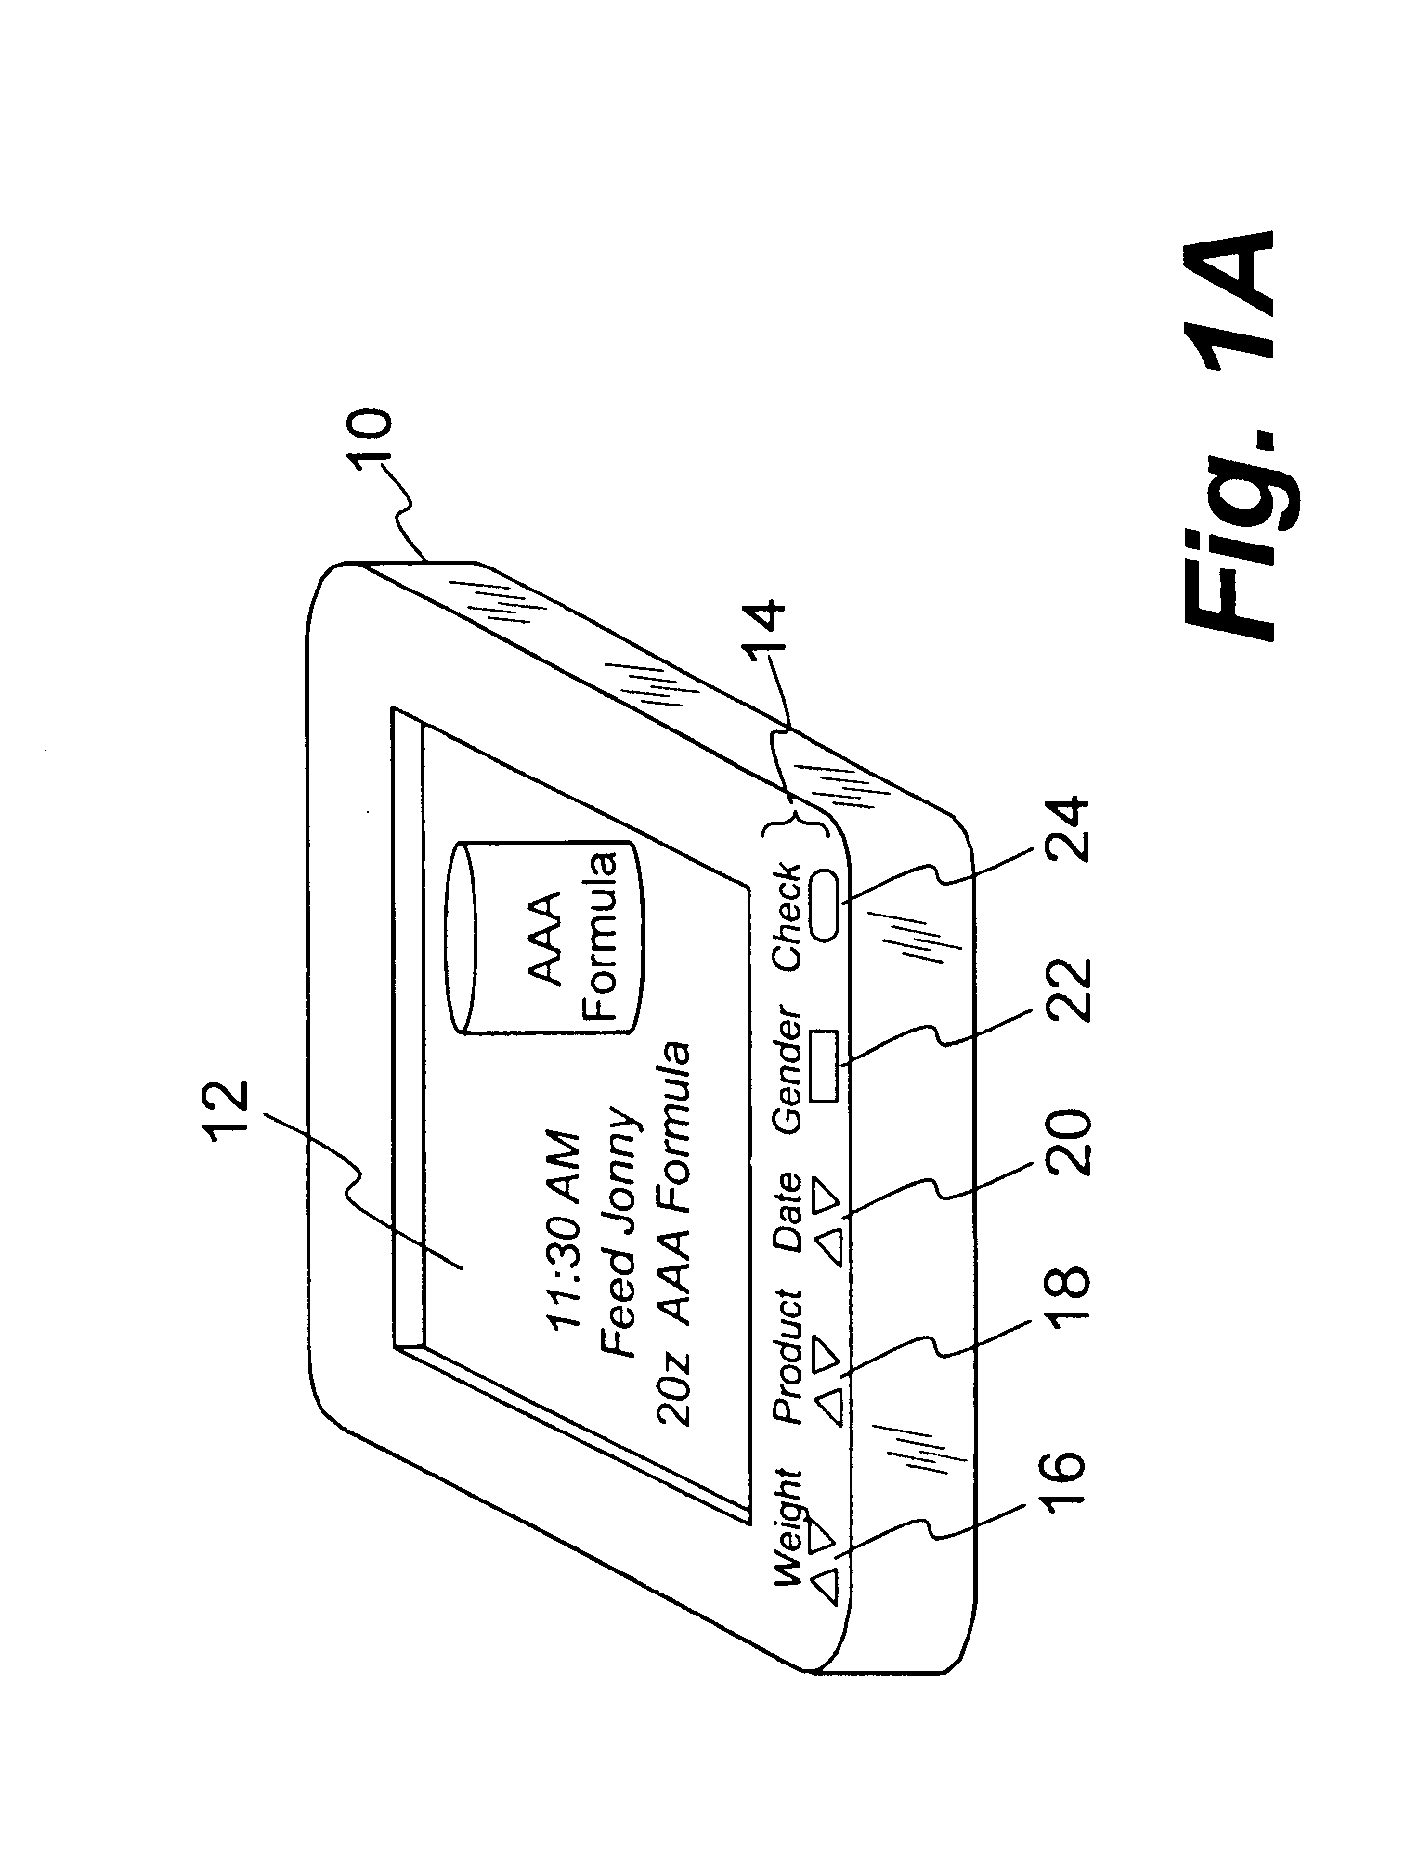 Method and apparatus for managing infant care